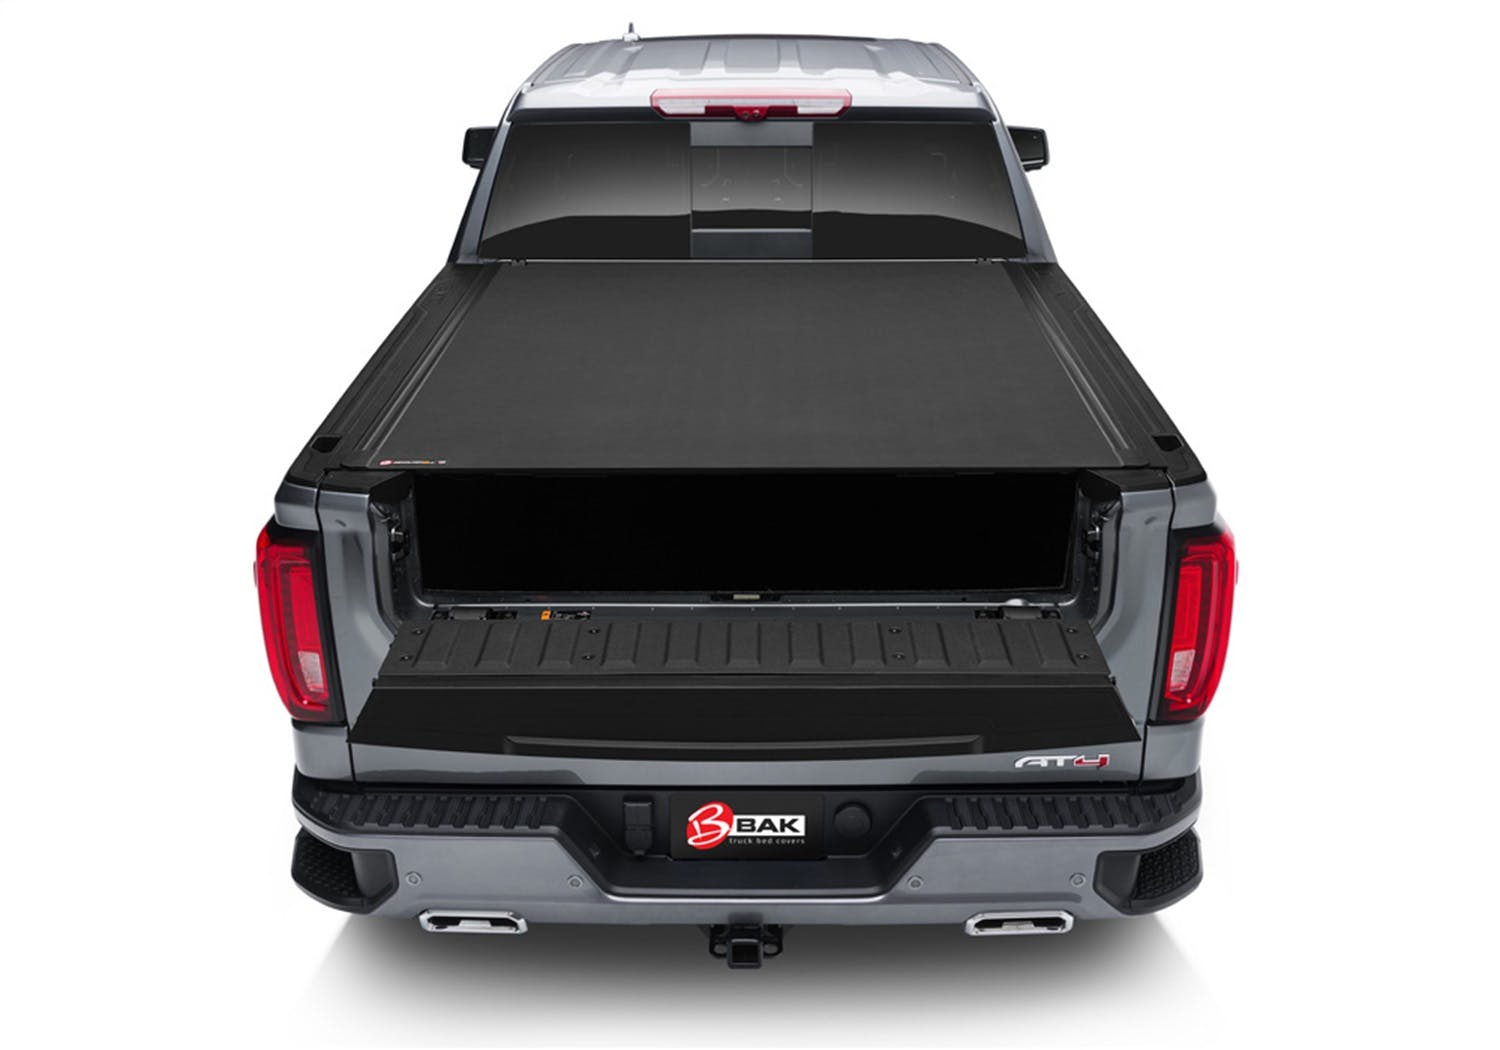 BAK Industries 80121 Revolver X4s Hard Rolling Truck Bed Cover